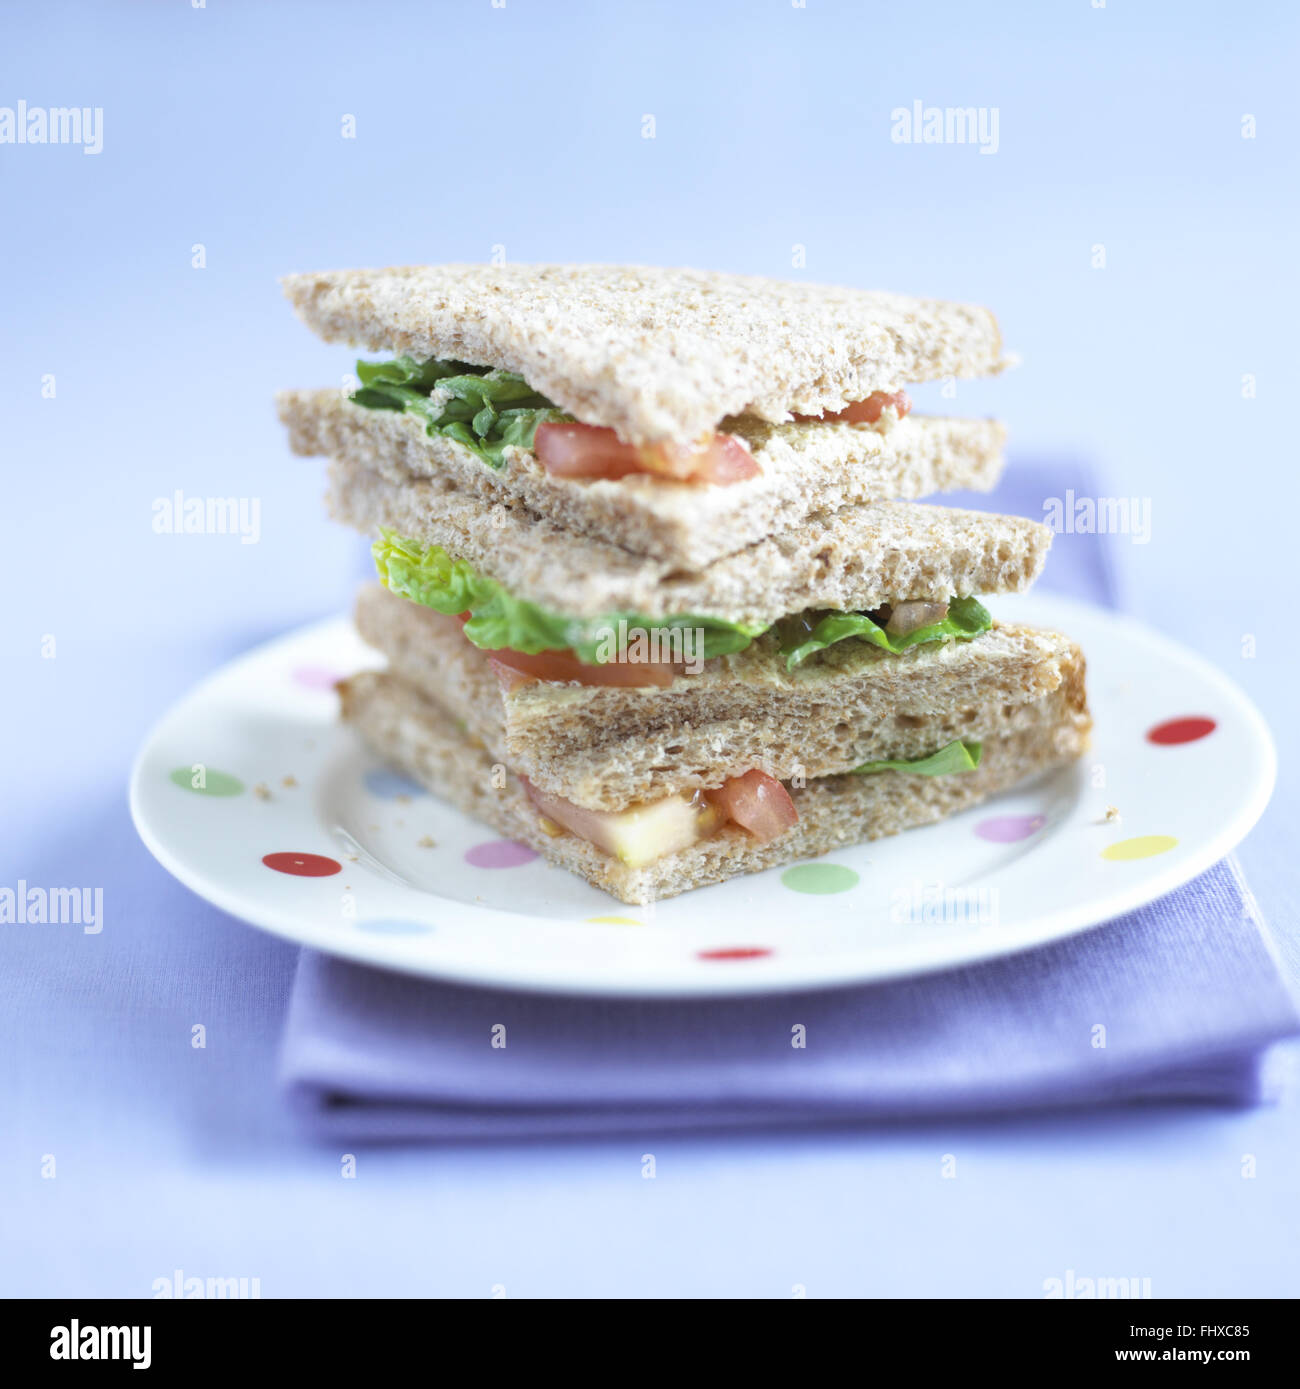 Three triangular sandwiches piled up on dotted plate, purple napkin underneath. Stock Photo